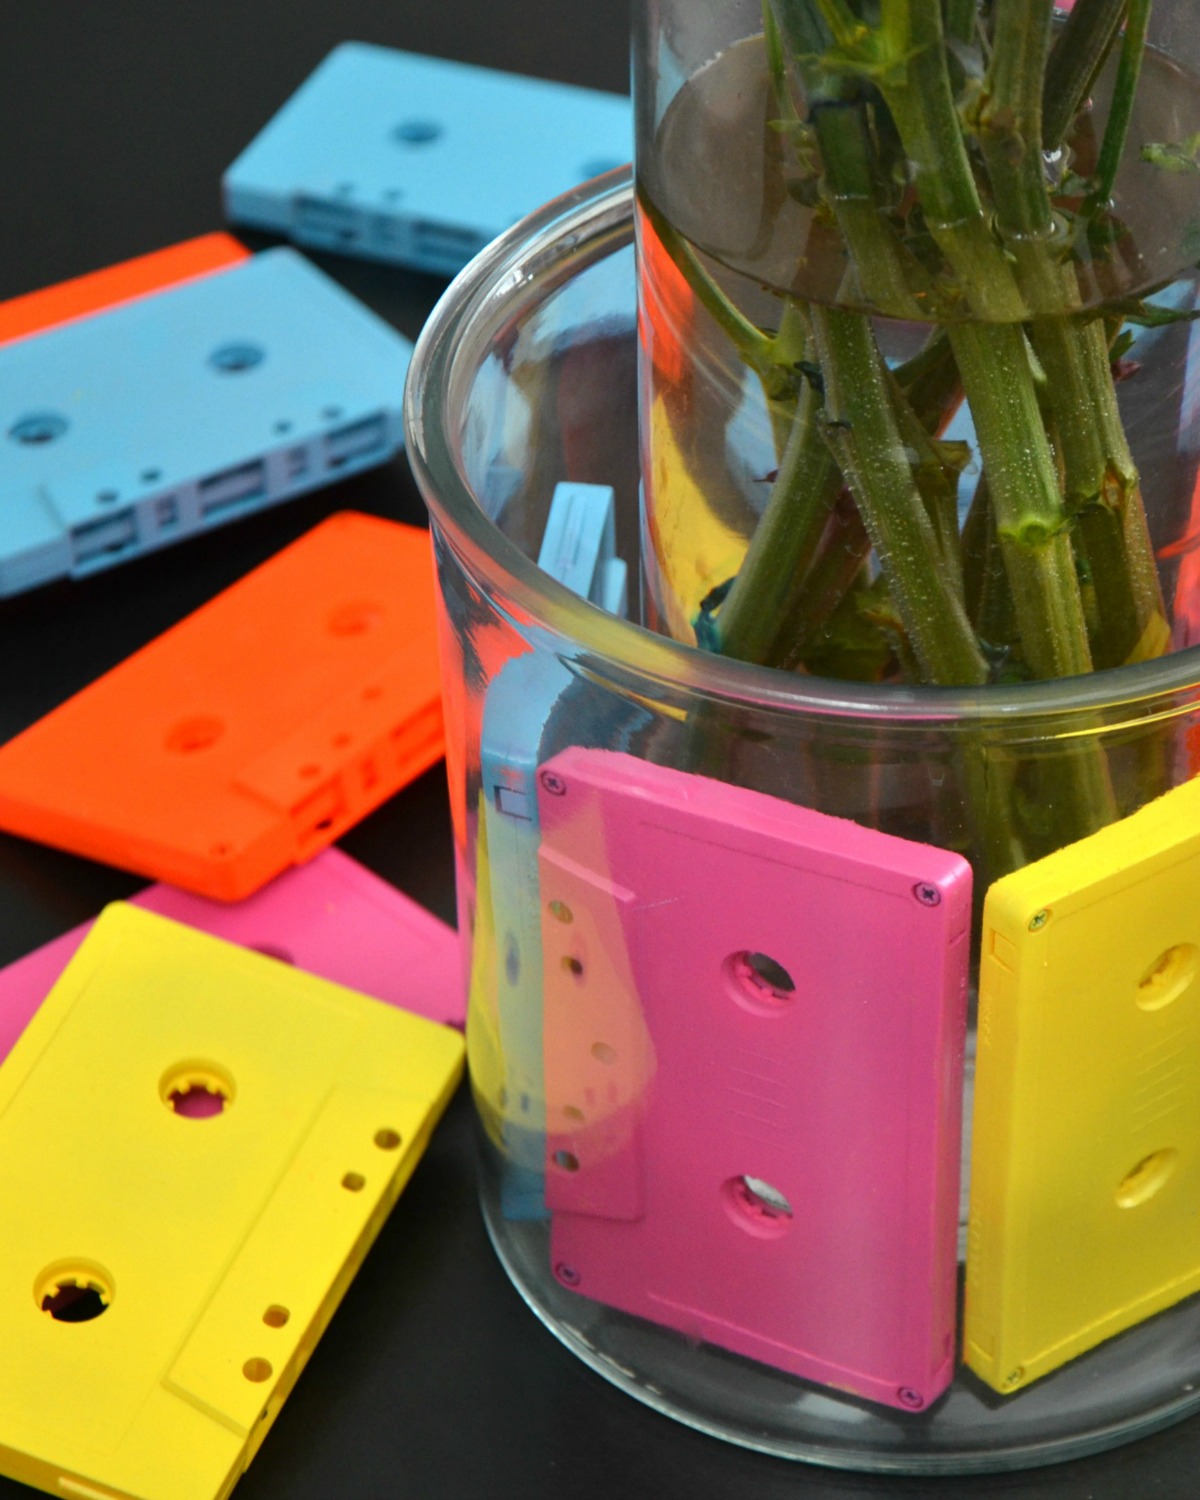 Use two vases and spray painted cassette tapes to make this fun cassette tape vase.